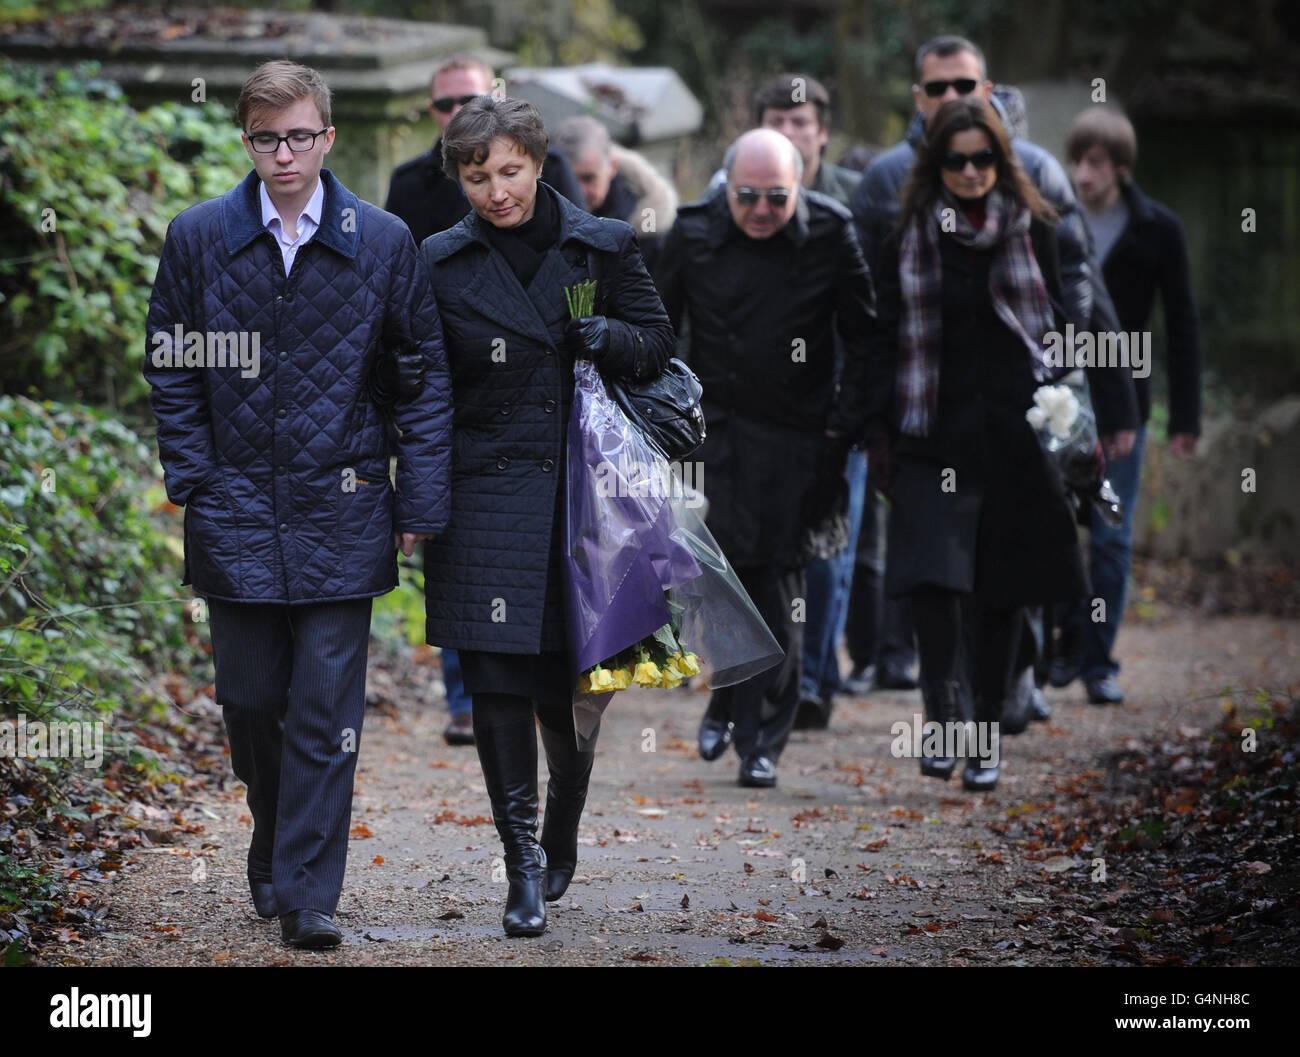 Marina Litvinenko, the widow of Alexander Litvinenko who died exactly five years ago, carries flowers as she walks with her son, Anatoly, 16, to mark the anniversary of her husbands death, at Highgate Cemetery in north London. Stock Photo